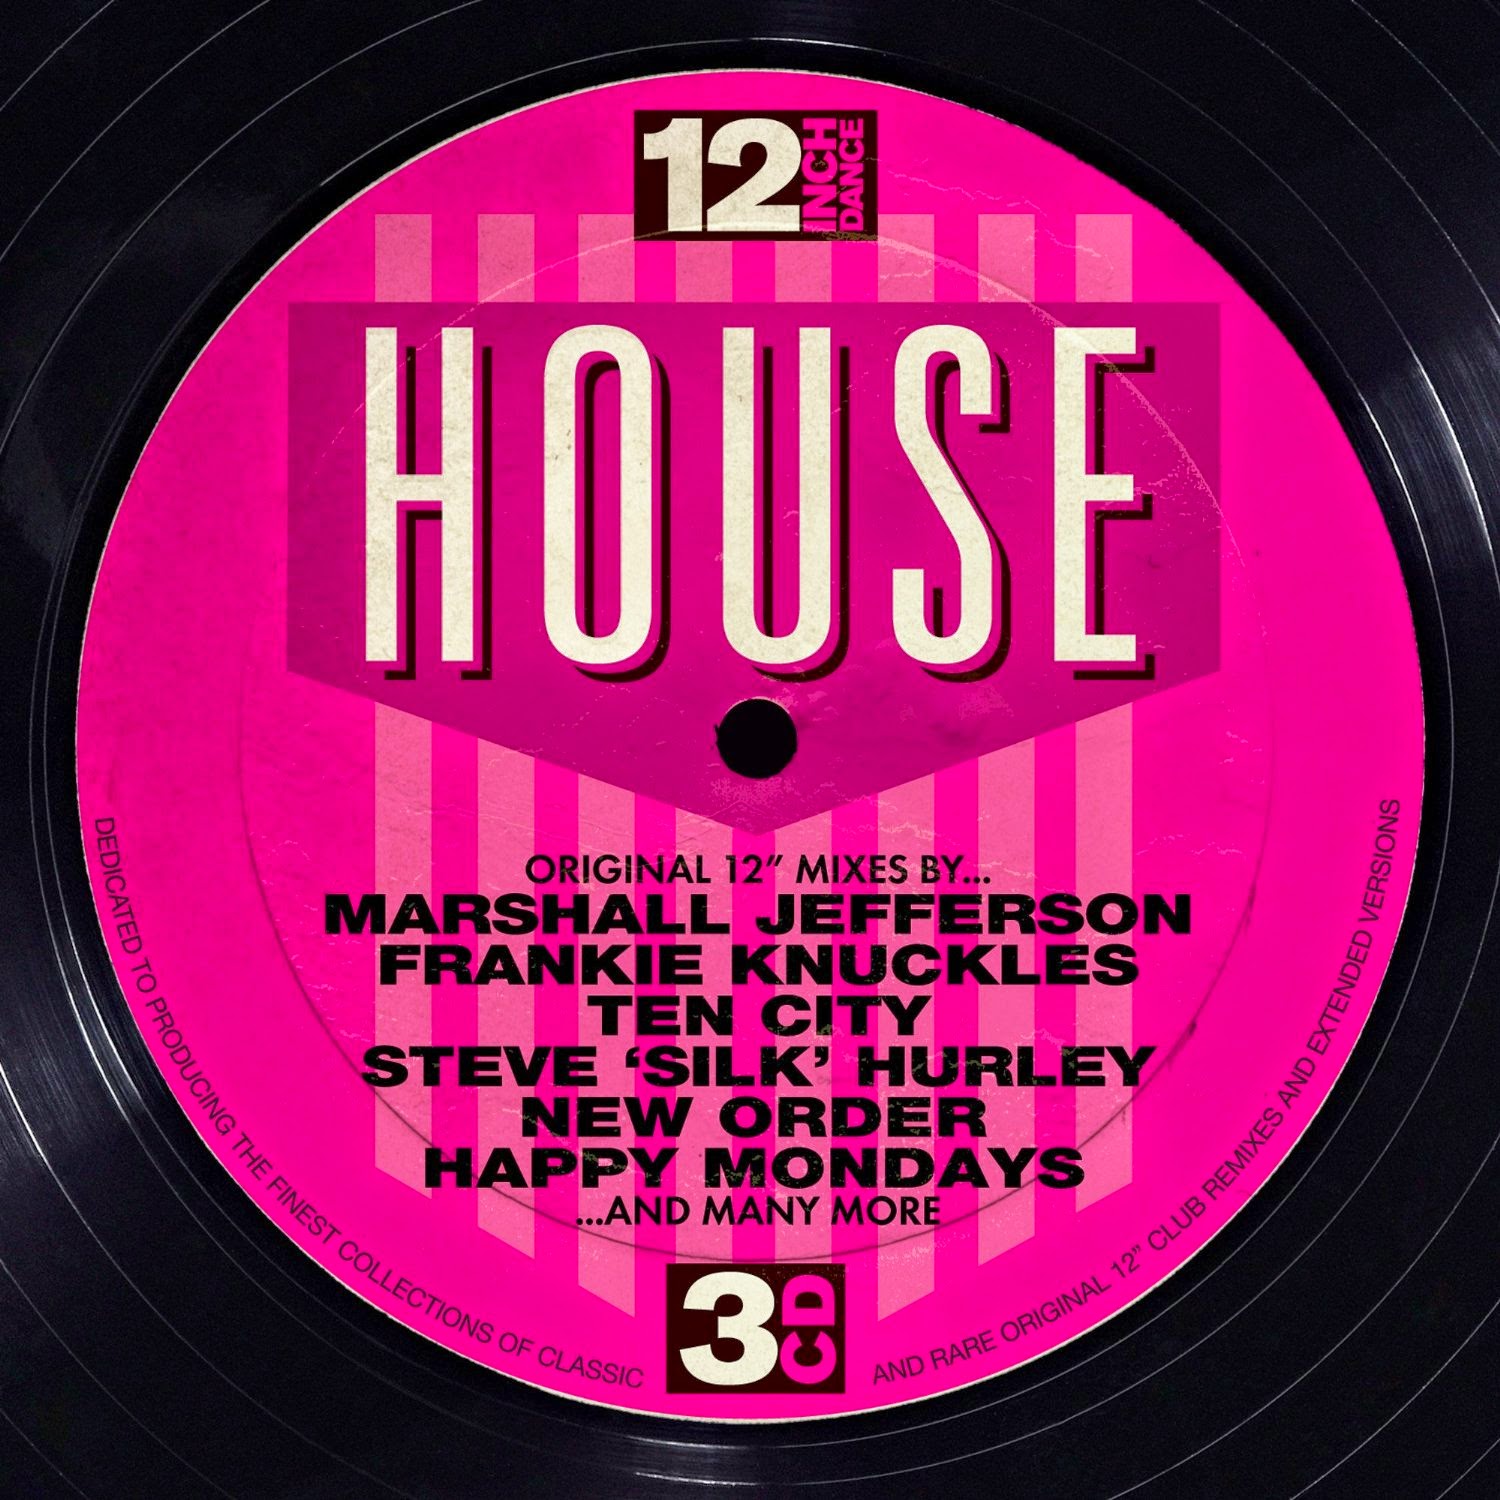 MUSICOLLECTION: 12 INCH DANCE - HOUSE - 20141500 x 1500